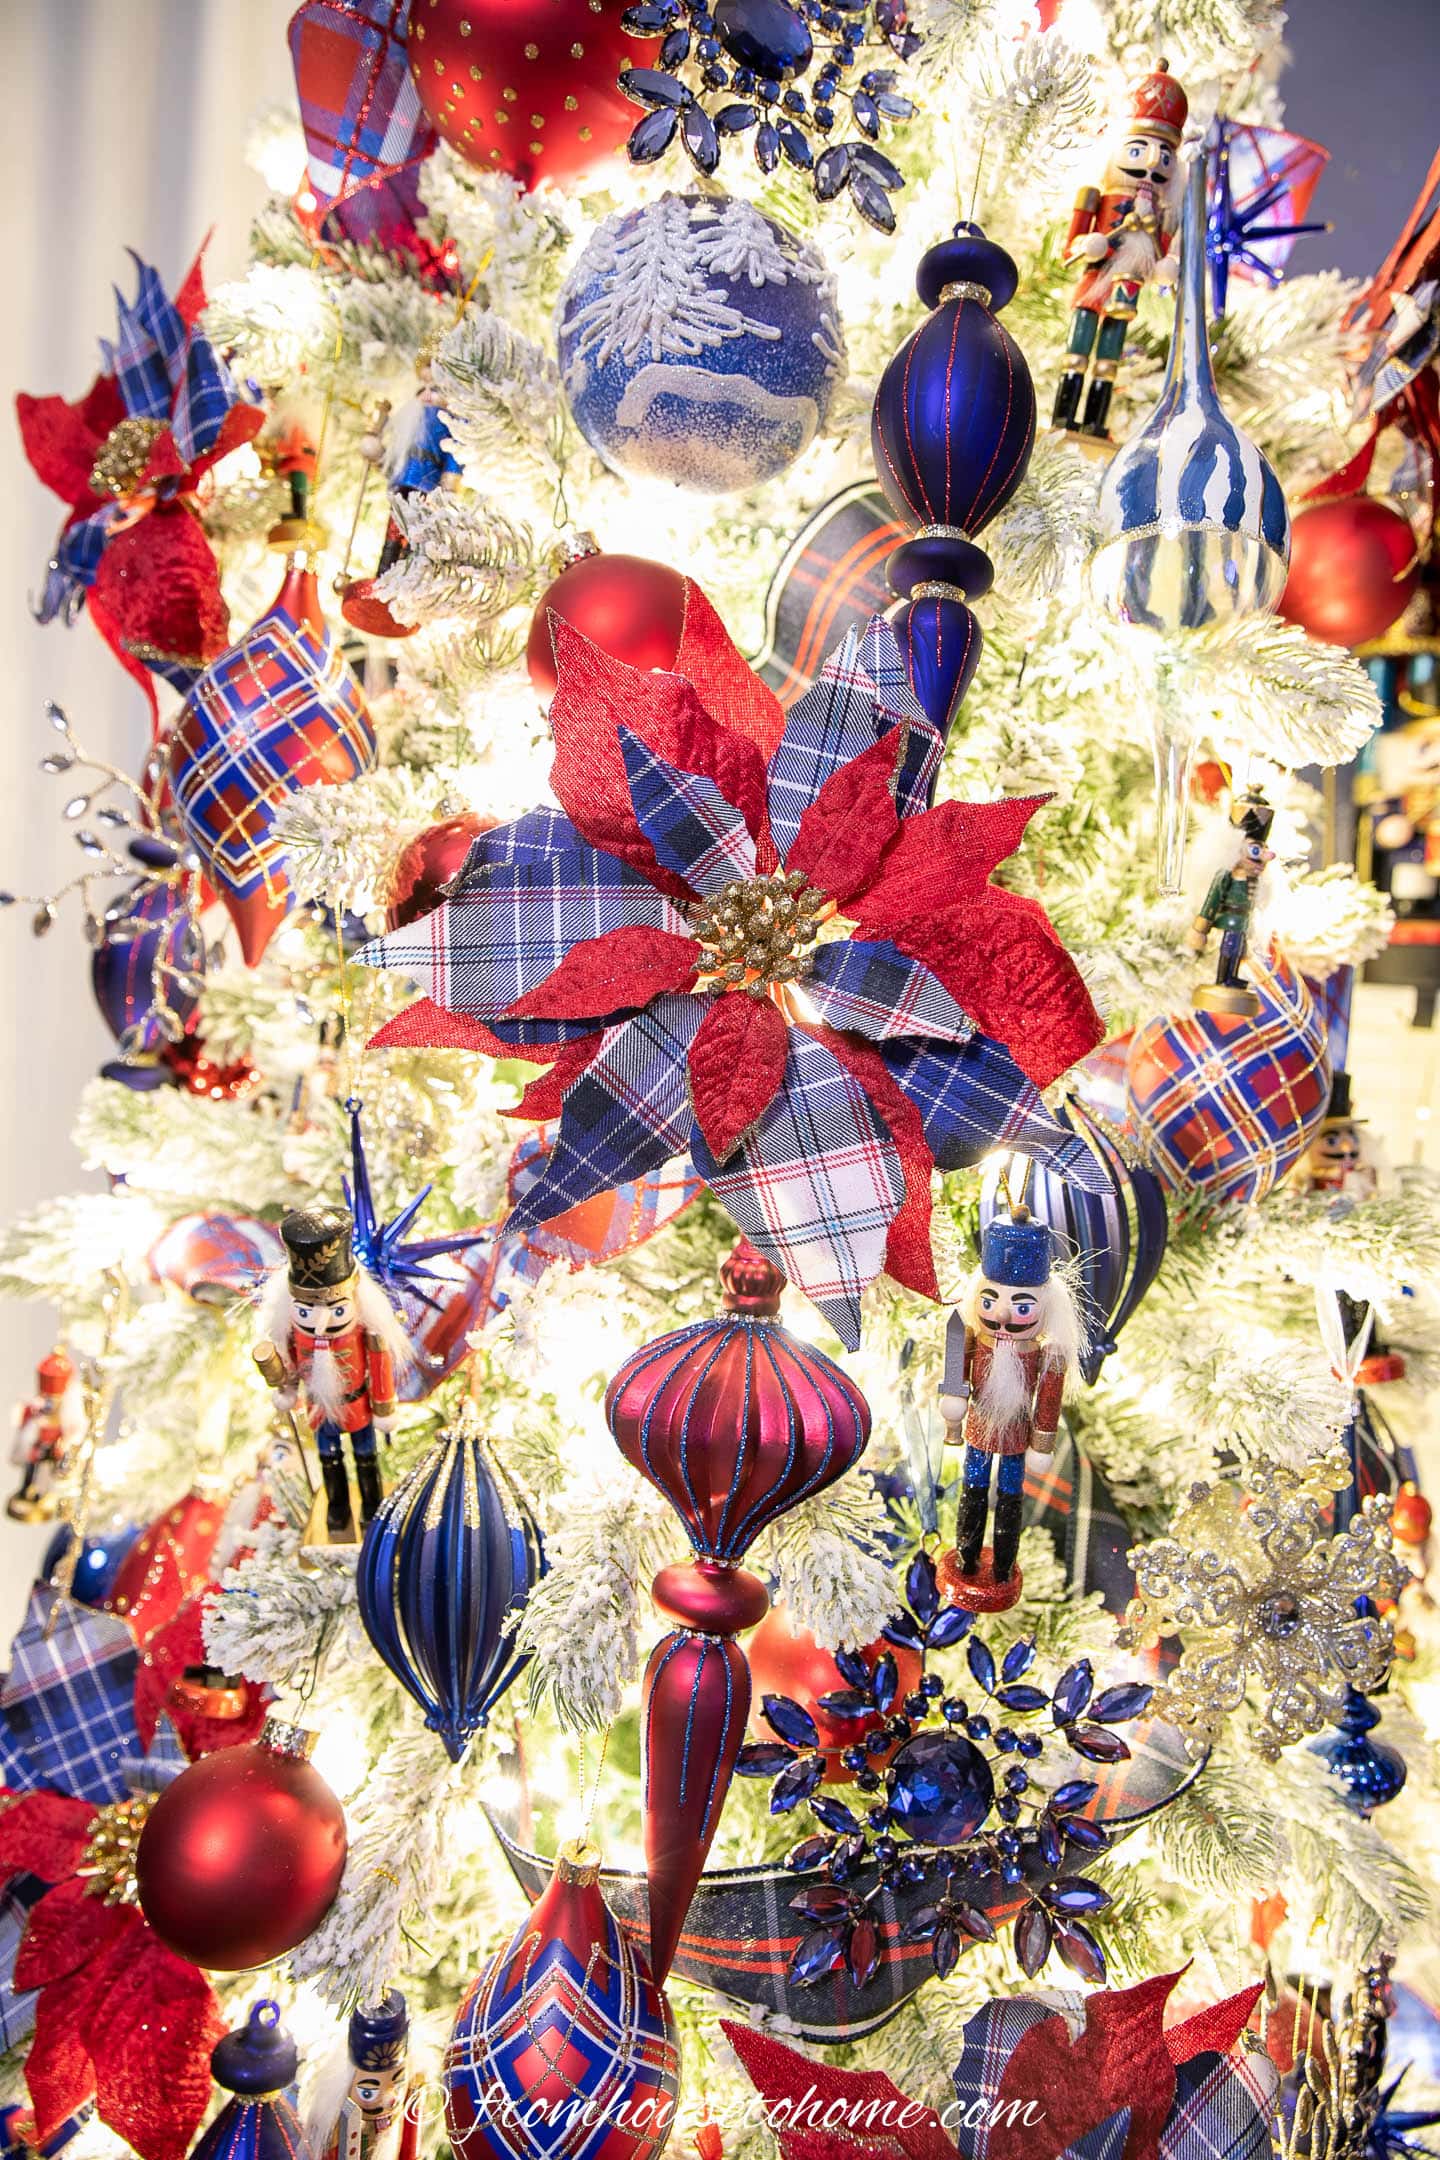 Red and blue plaid poinsettia ornaments on a nutcracker Christmas tree with red and blue ornaments